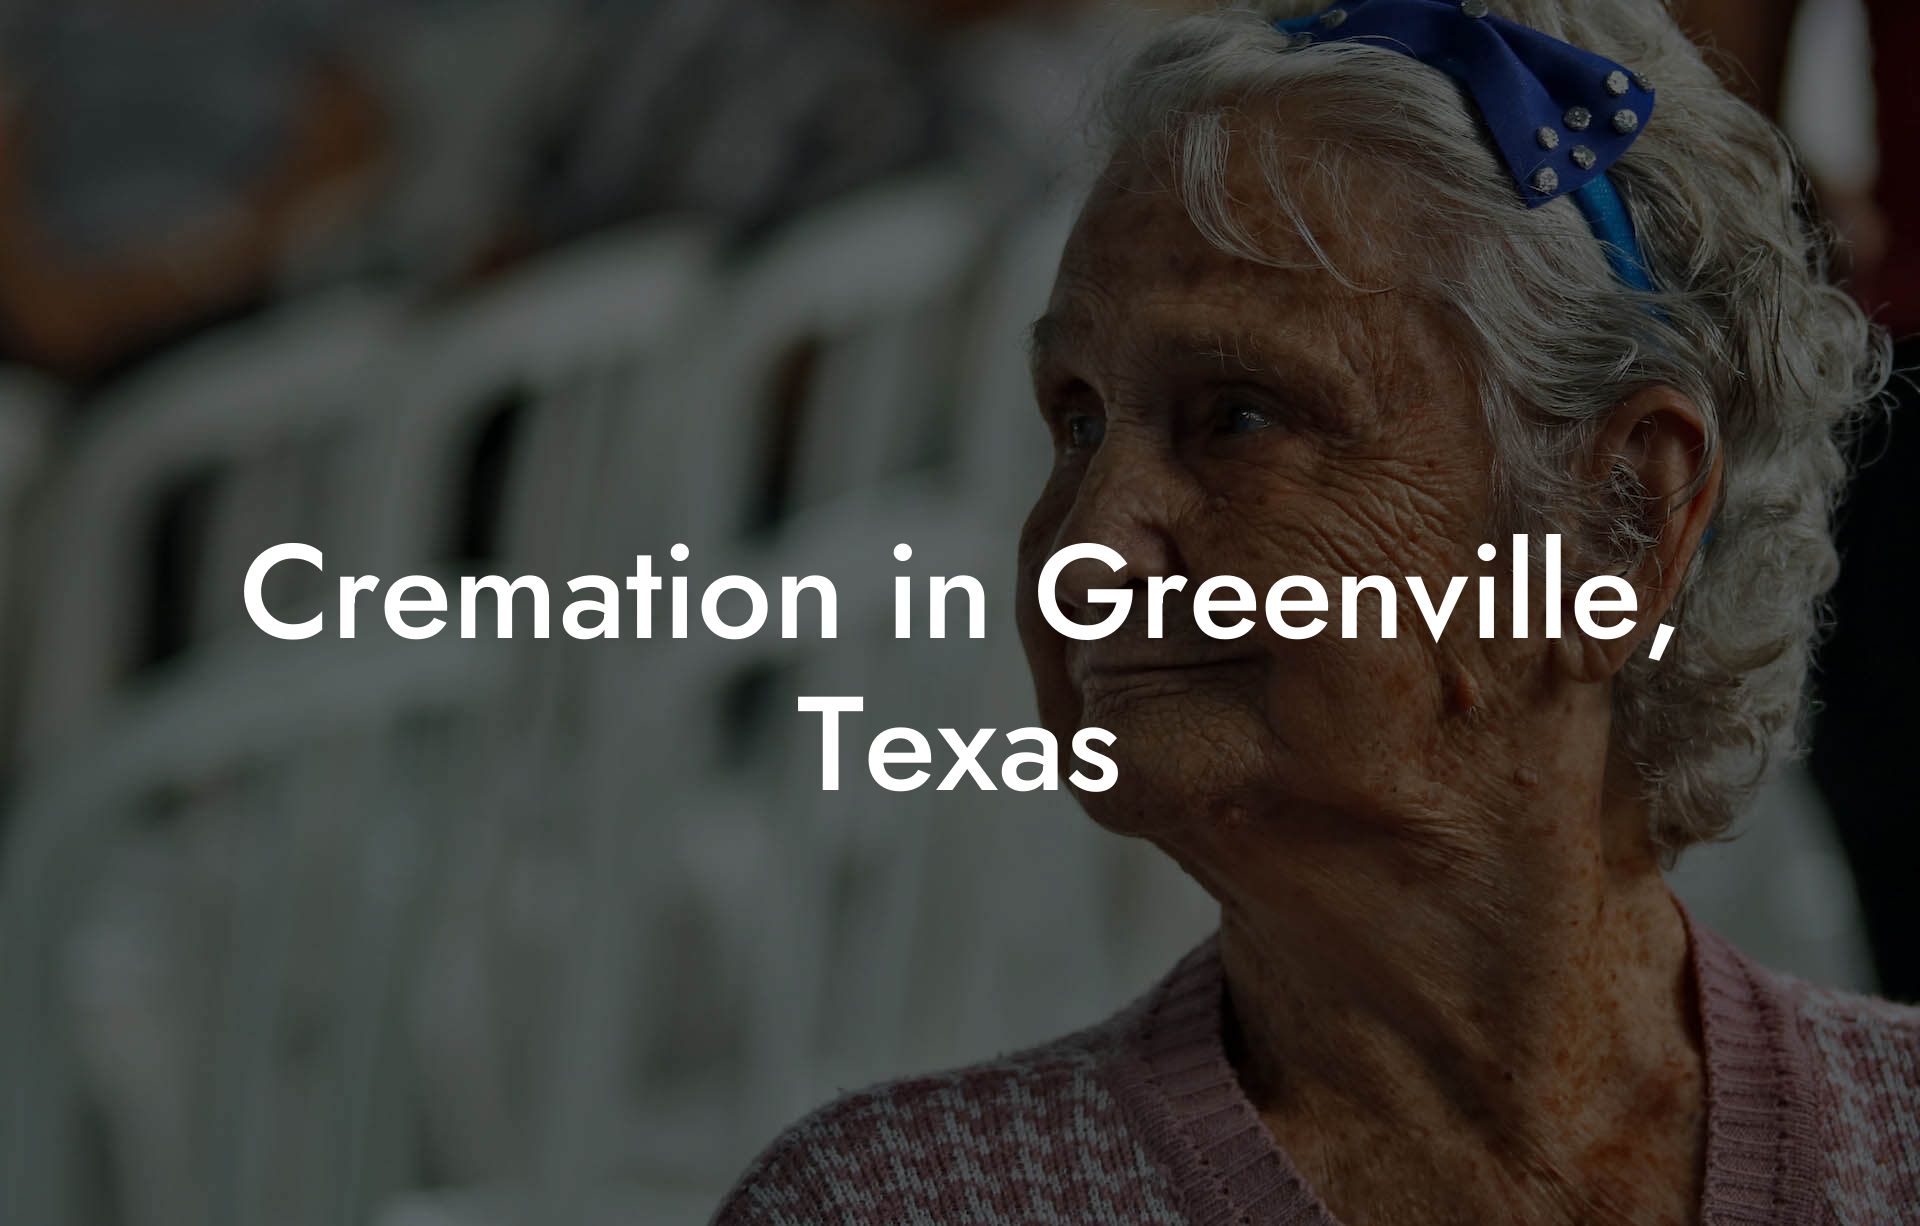 Cremation in Greenville, Texas